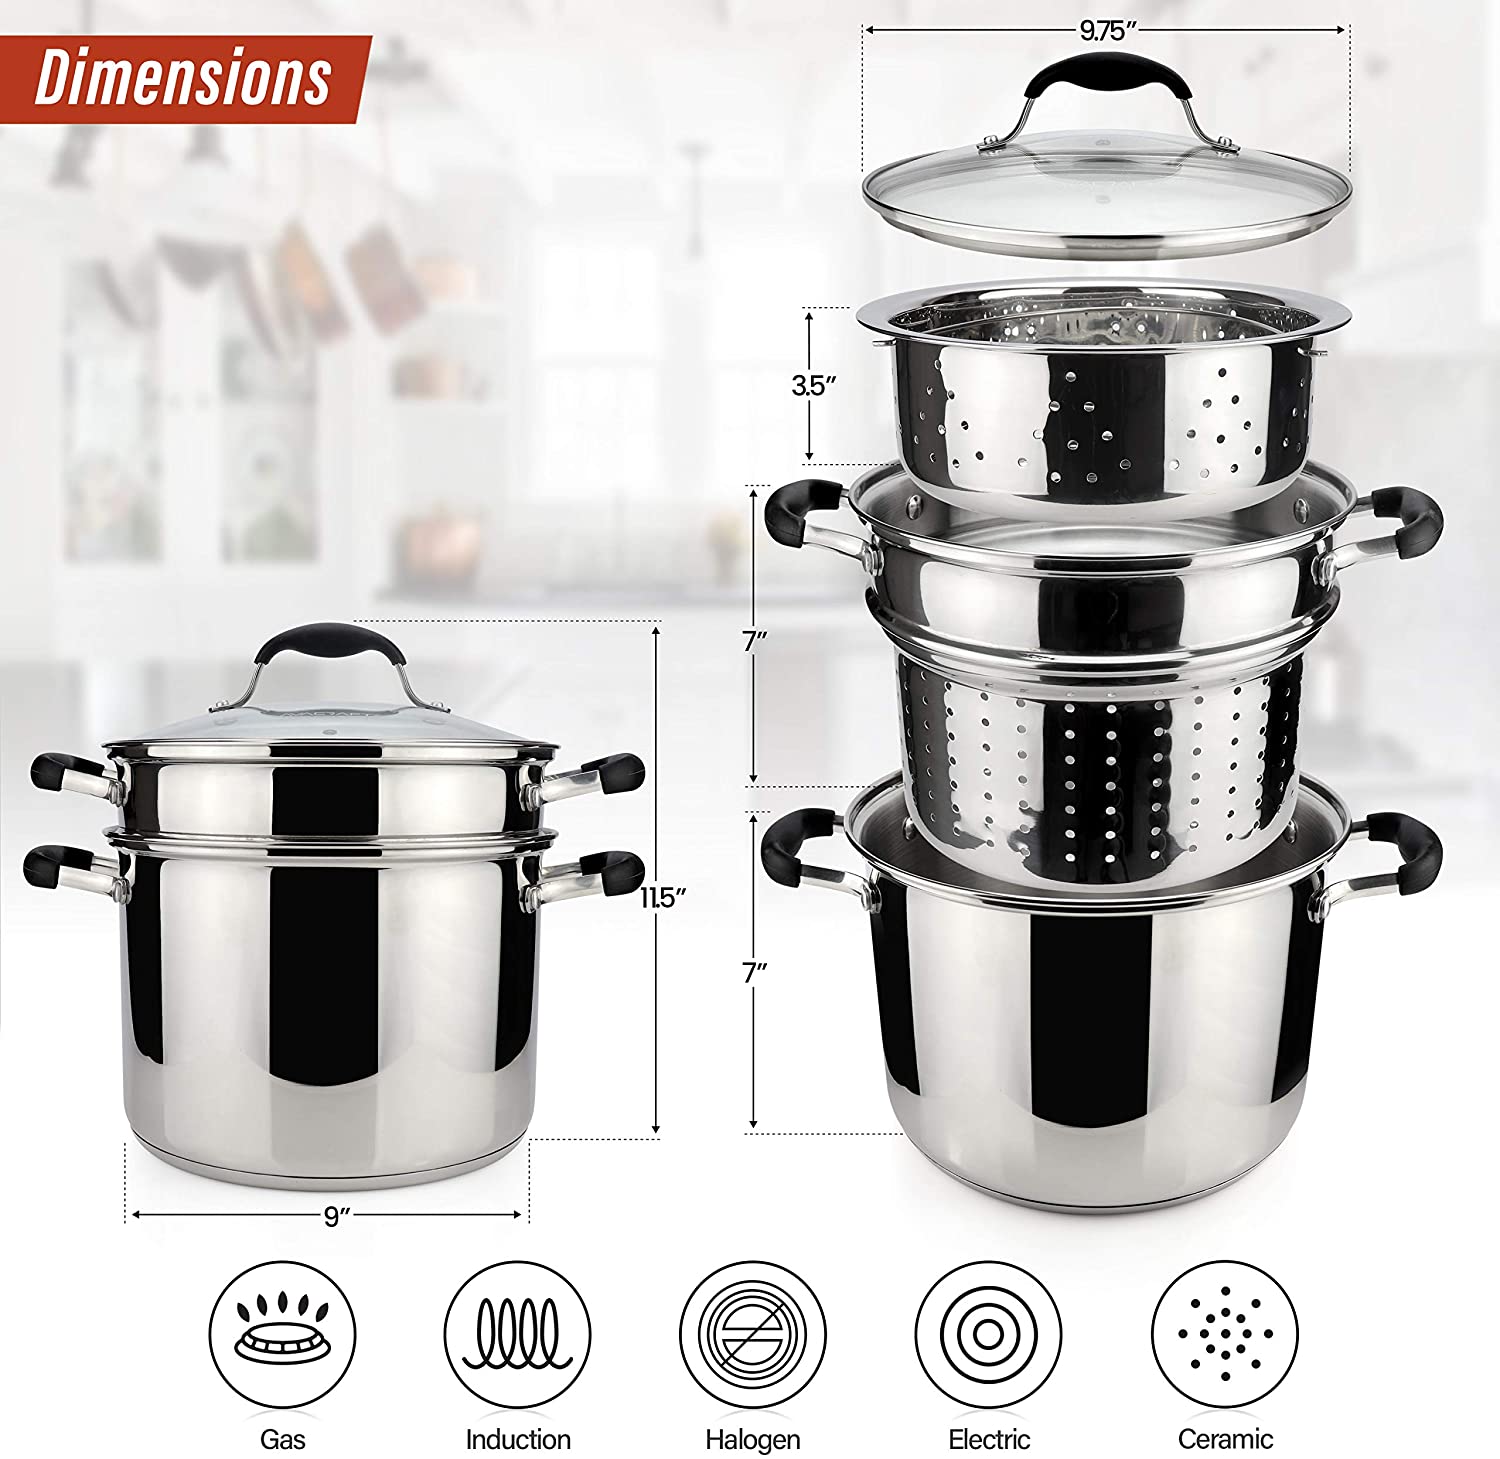 AVACRAFT 18/10 Stainless Steel, 4 Piece Pasta Pot with Steamer and Pasta Insert (7 Quart)